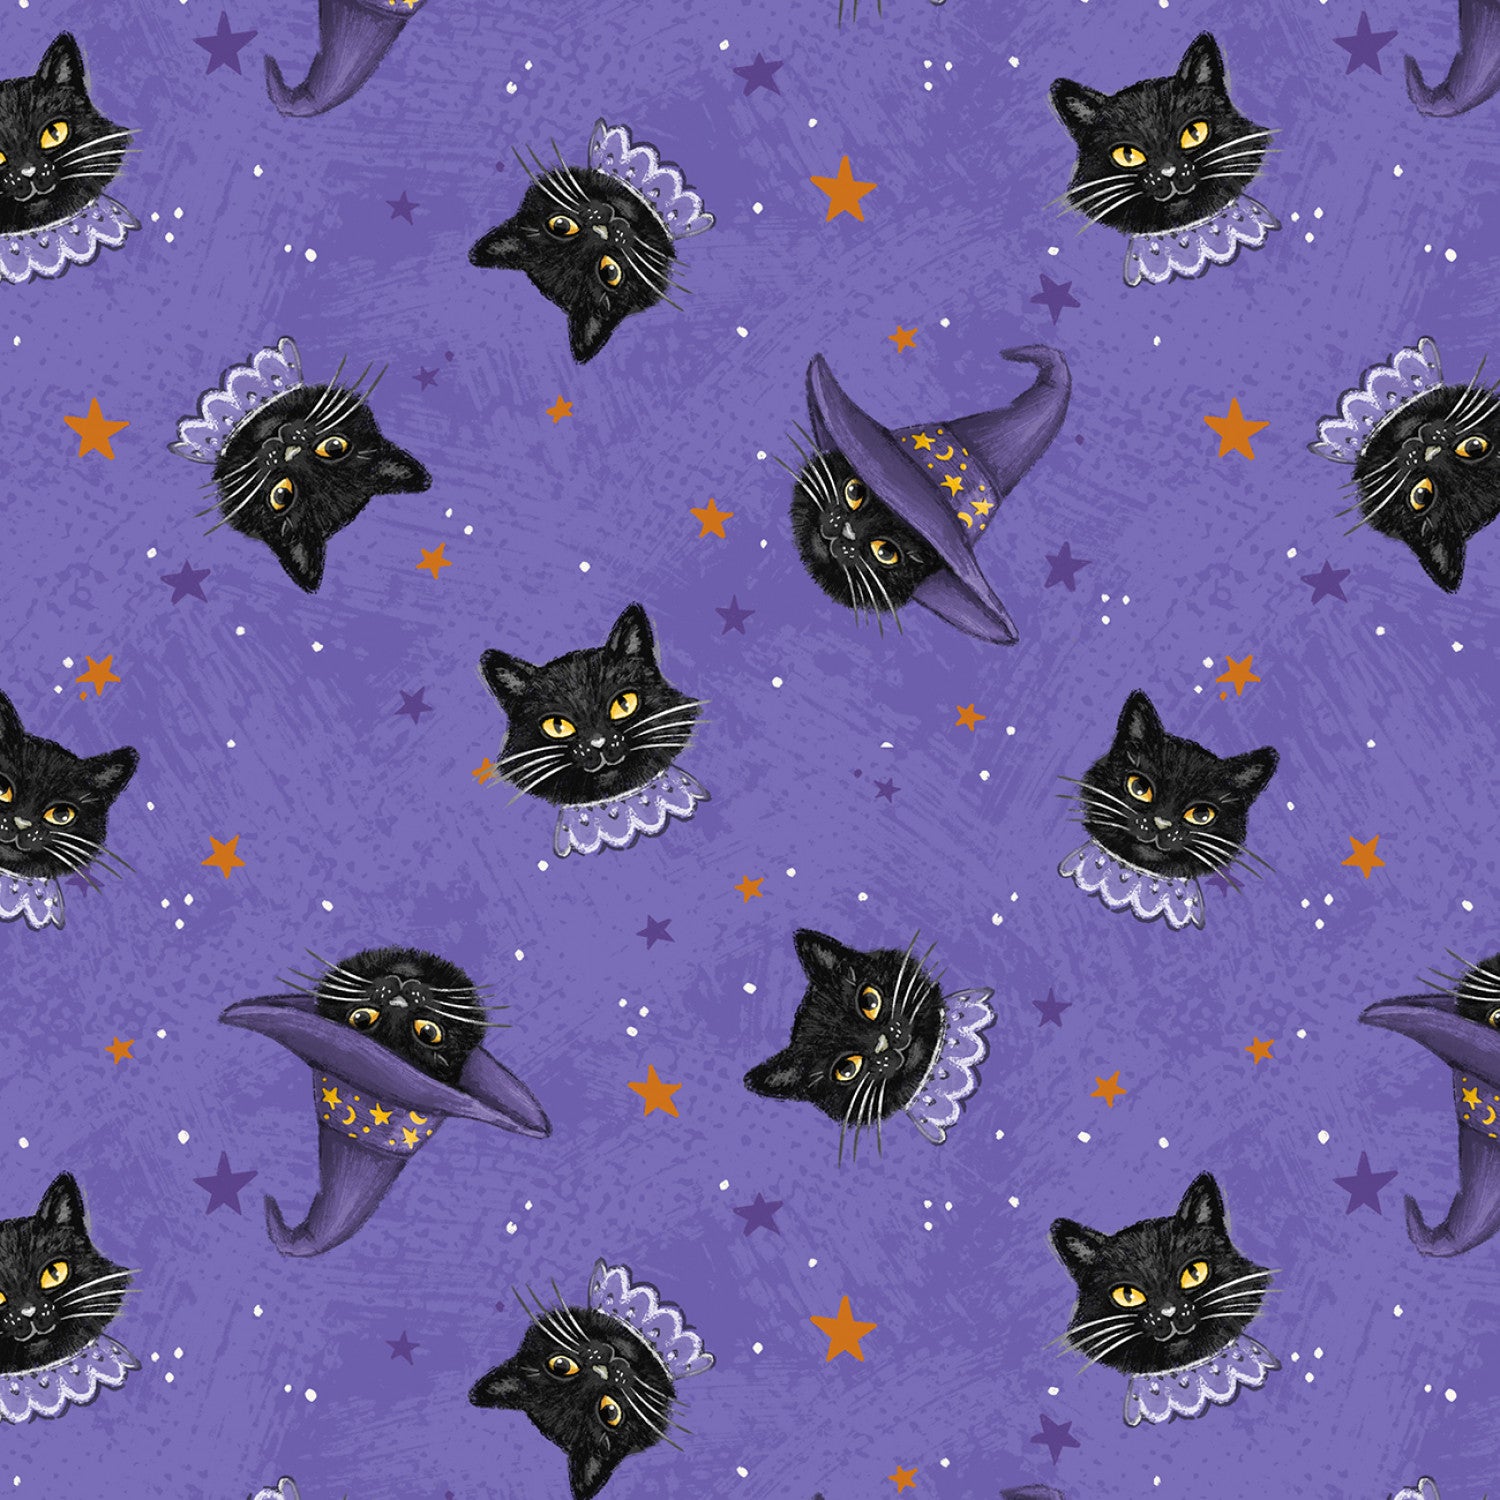 Meow-Gical Night | 5" Charm Pack | Michael Davis for Wilmington | 42pcs